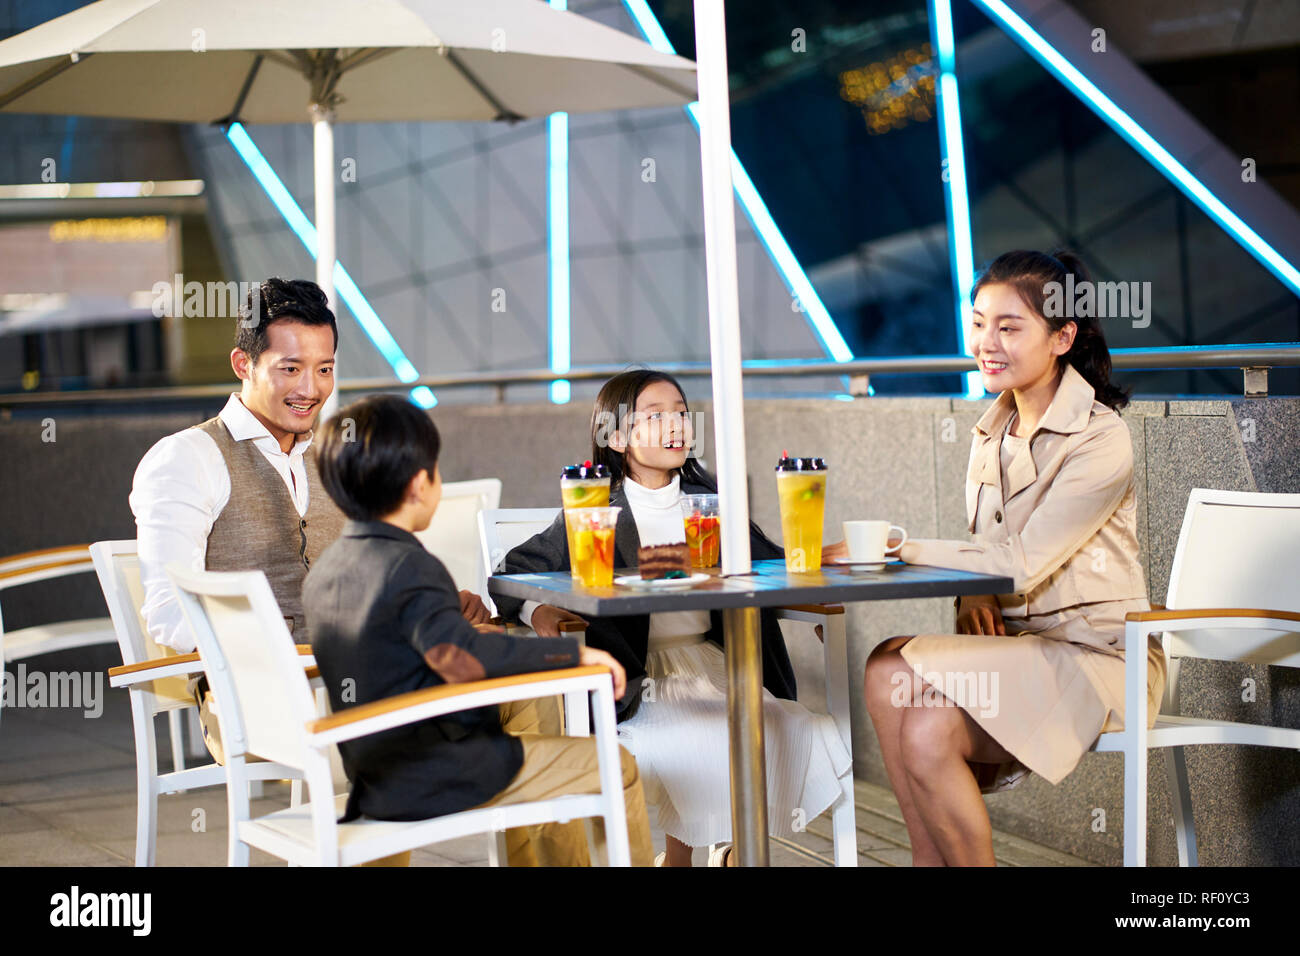 happy asian family with two children relaxing talking having drinks and desserts at an outdoor coffee place. Stock Photo